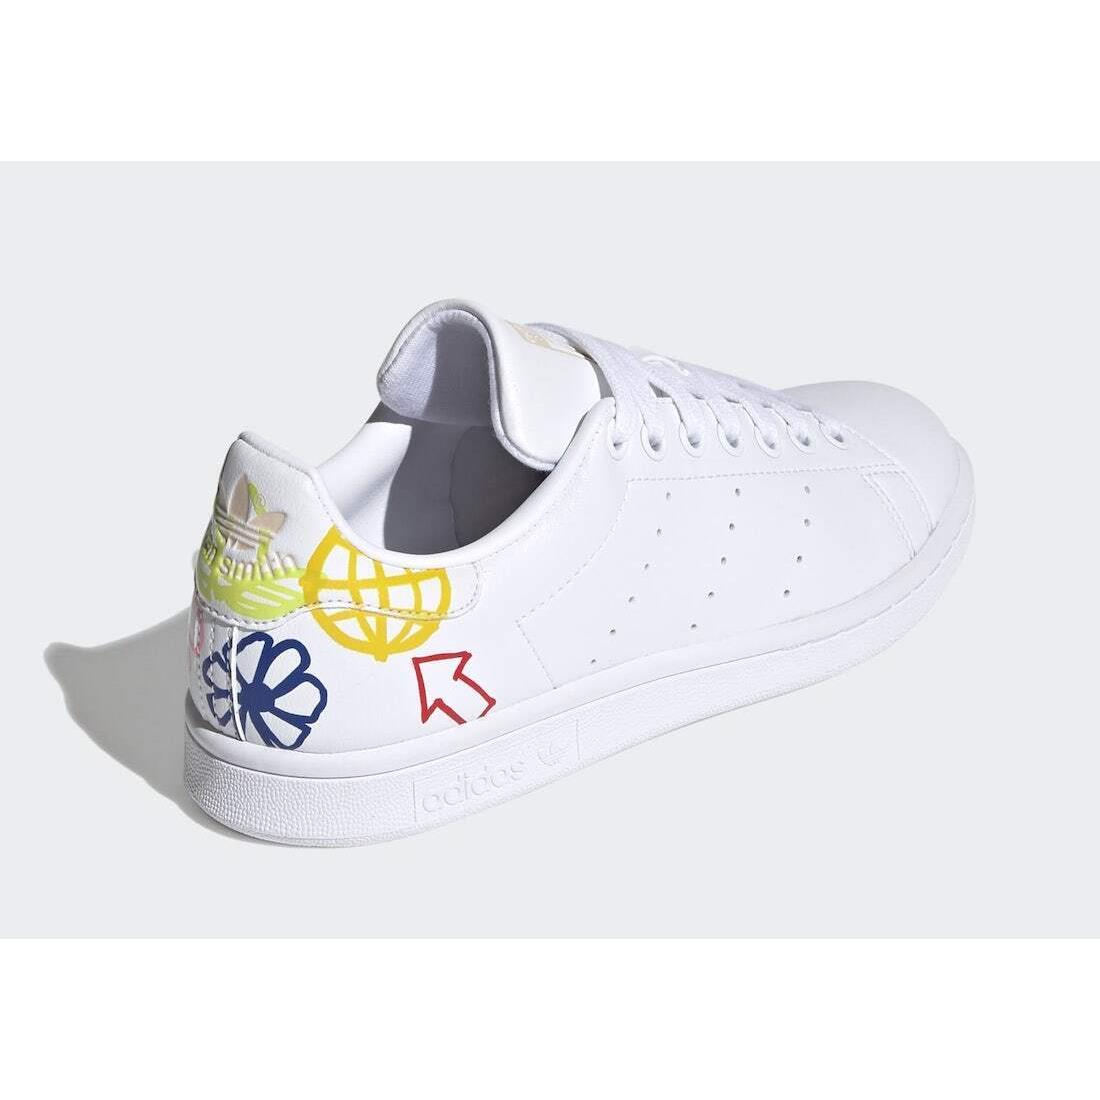 Adidas shoes STAN SMITH - WHITE/MULTICOLOR 5